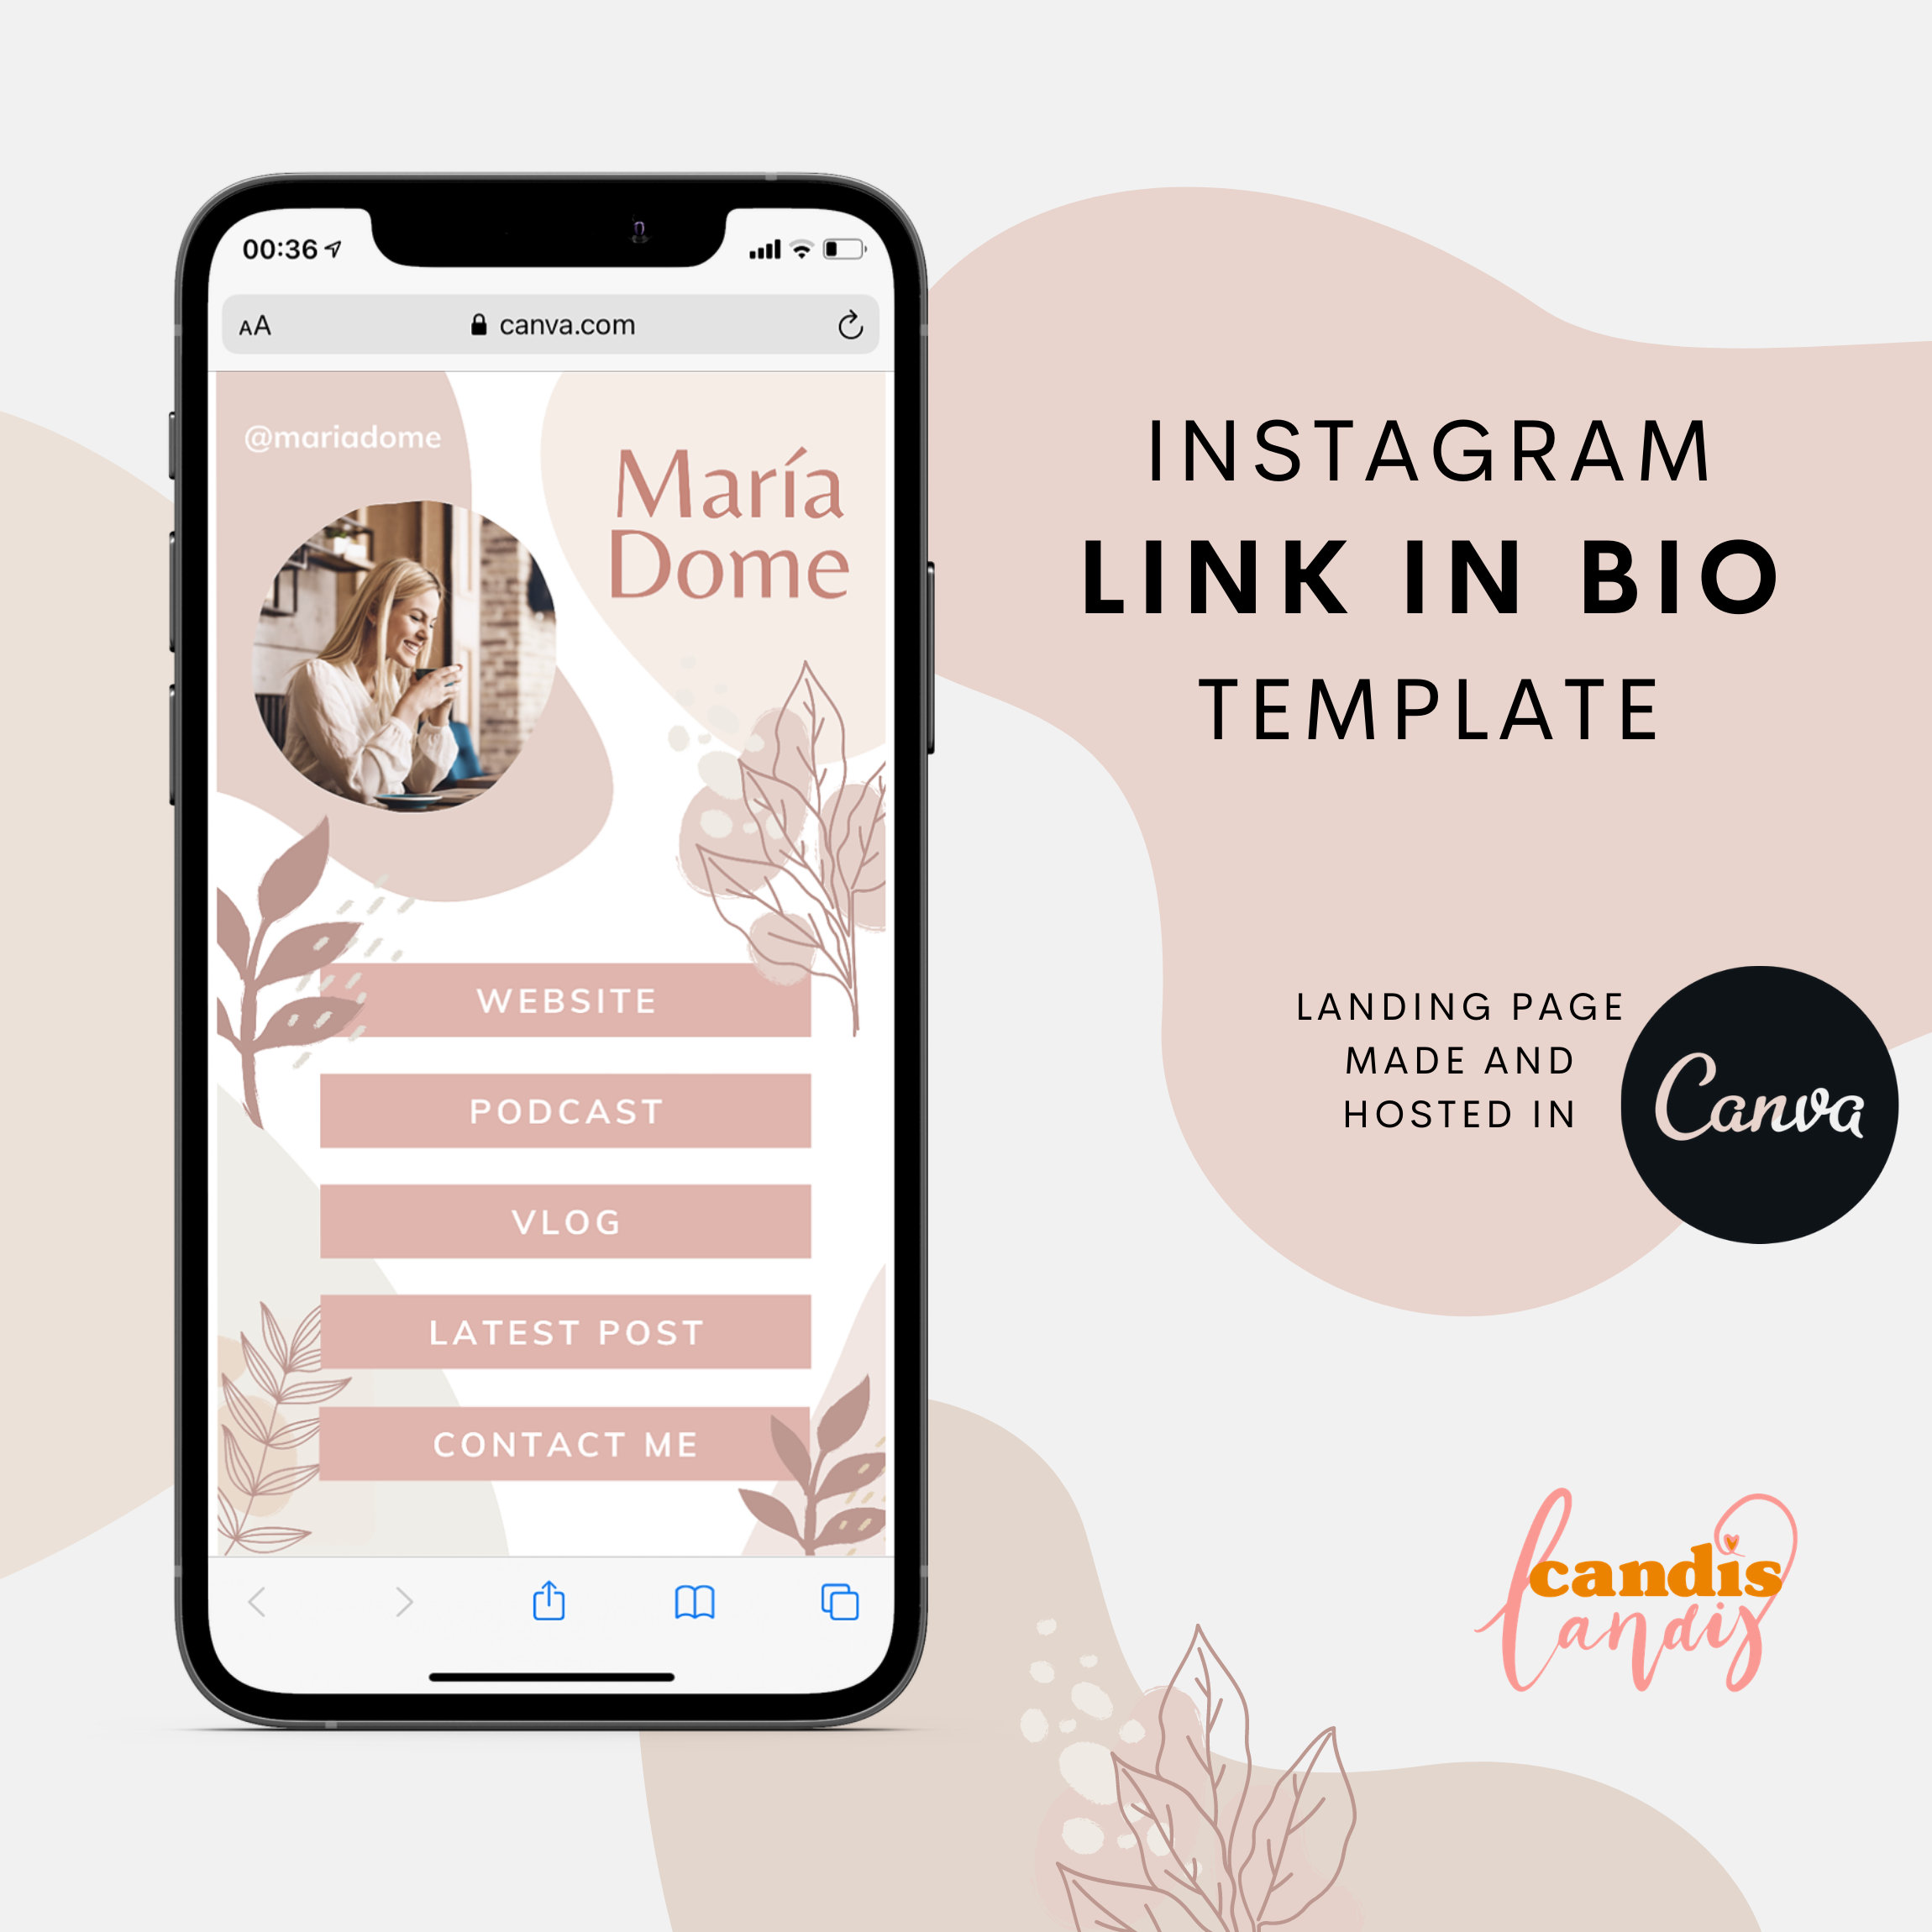 Instagram takes on Linktree and others with support for up to 5 'links in  bio